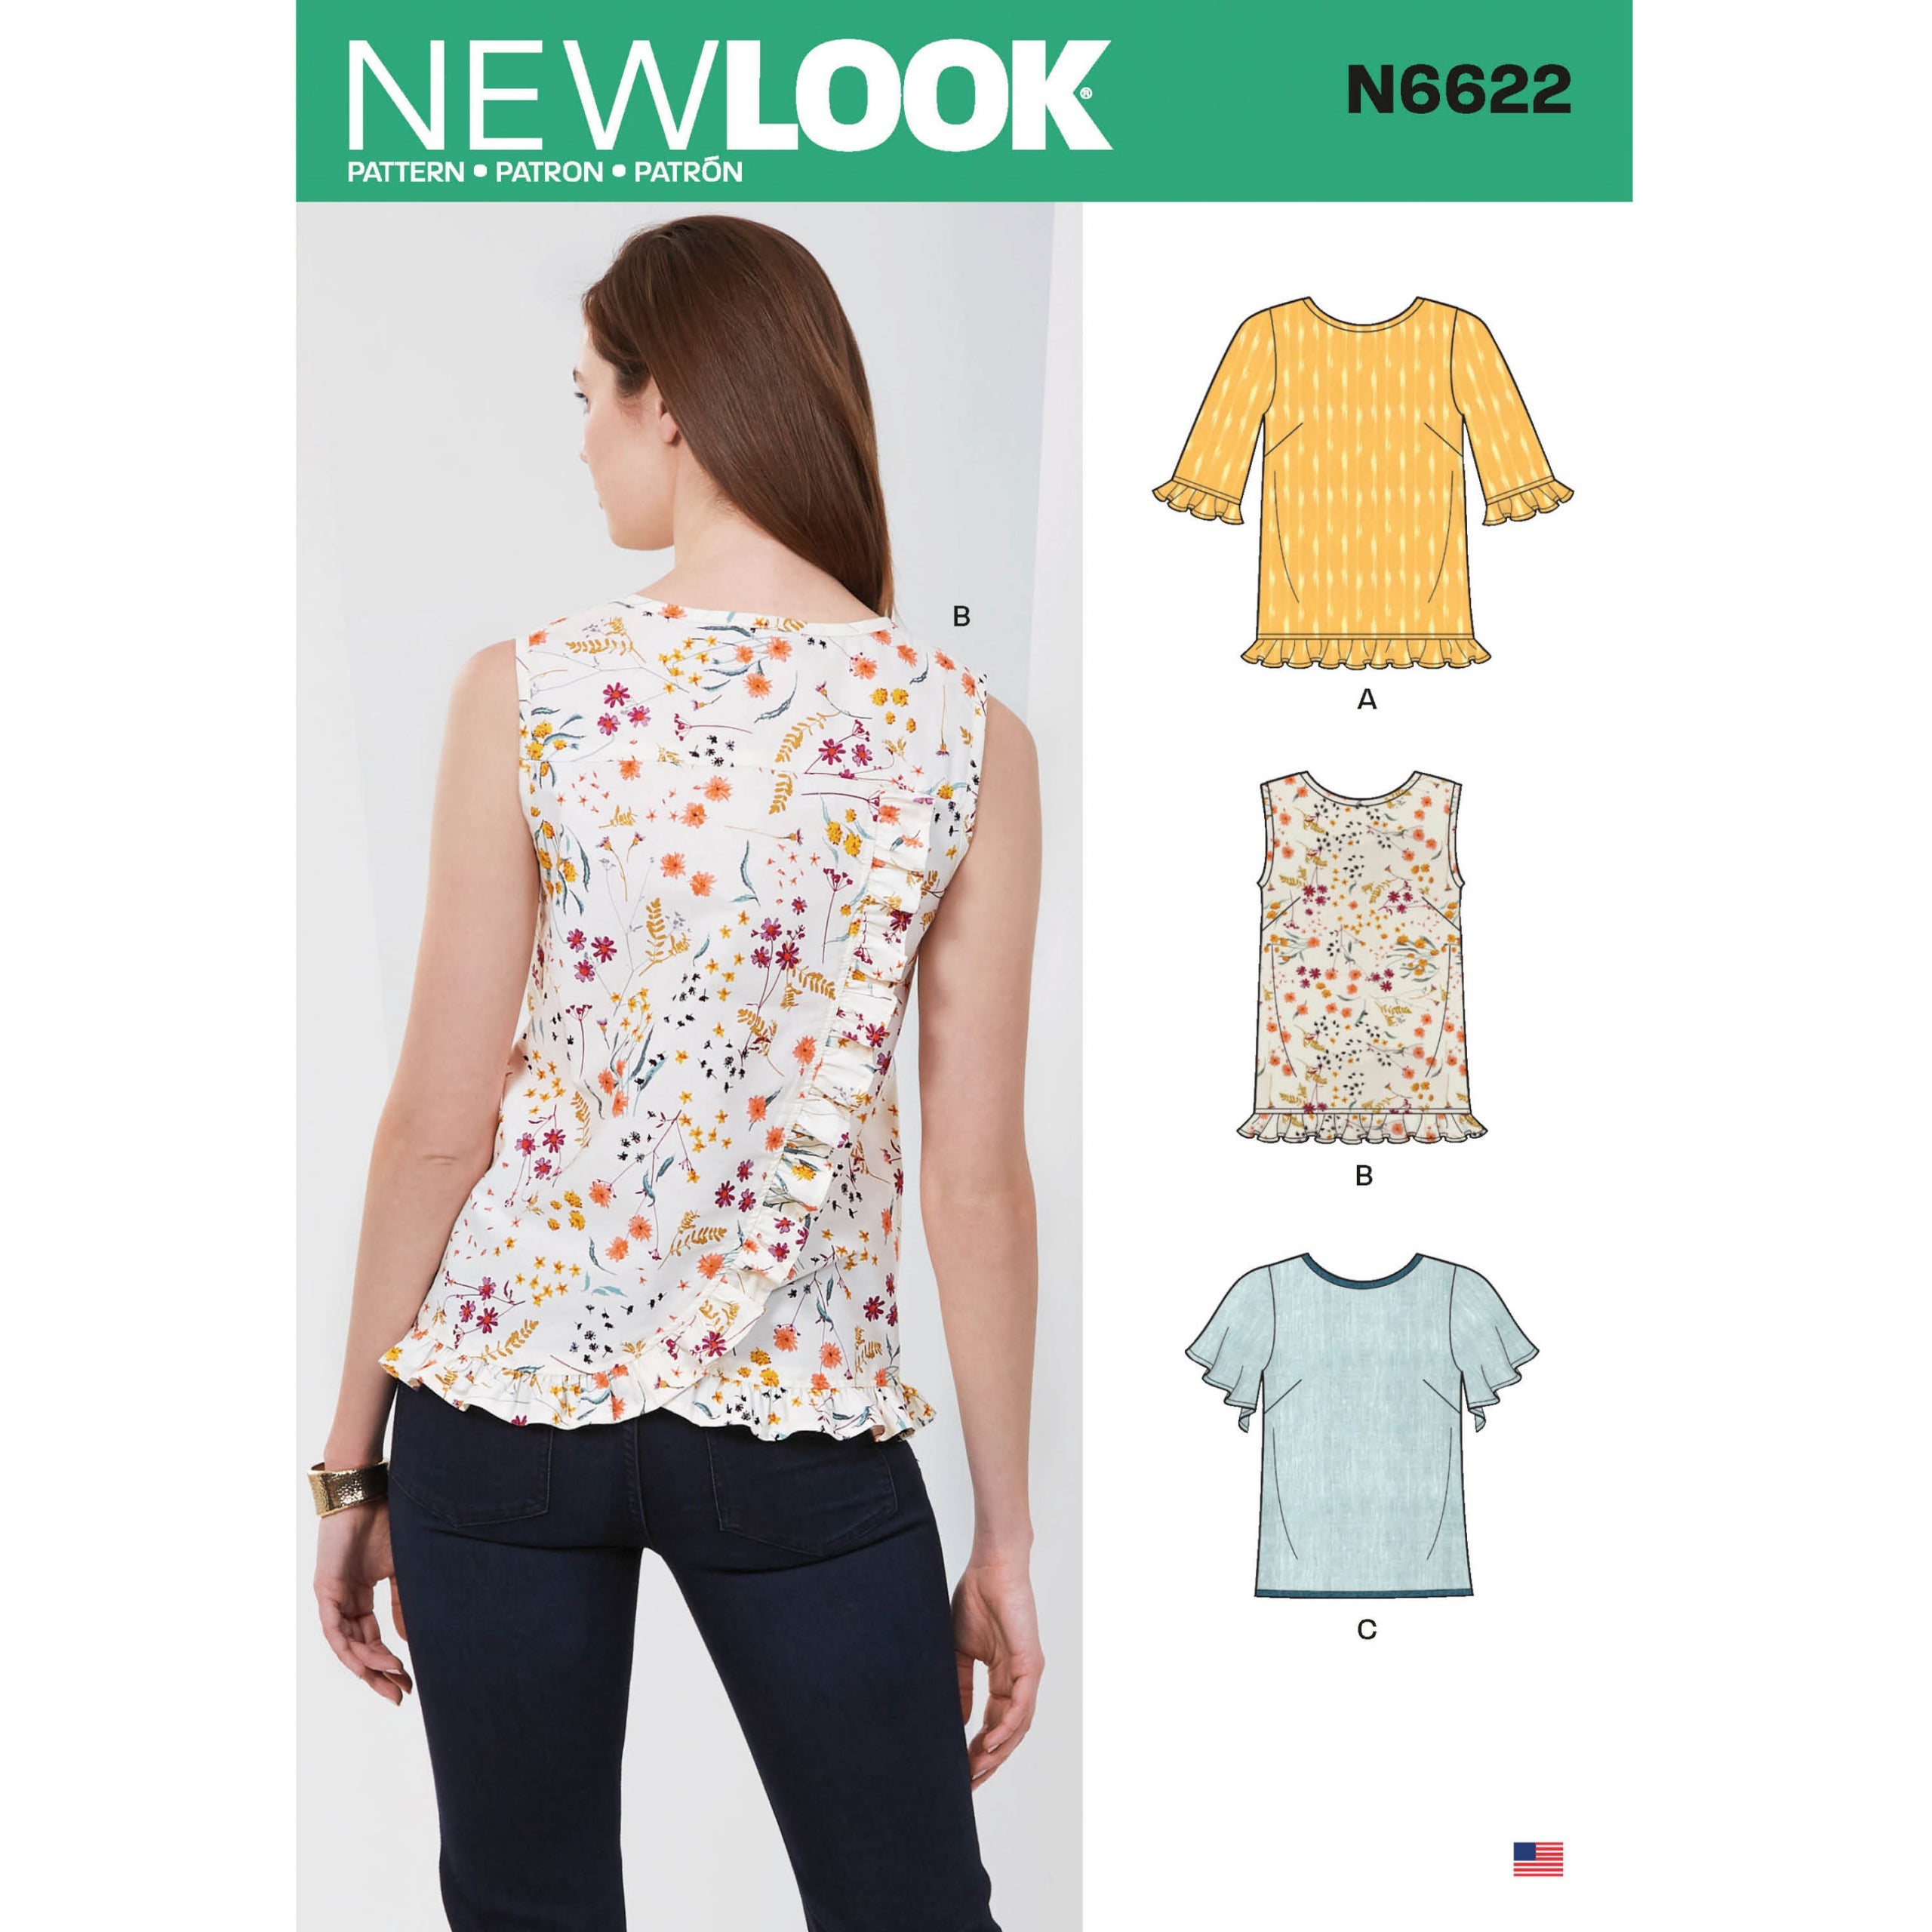 Misses' Tops New Look N6622 Multi-Size Sewing Pattern